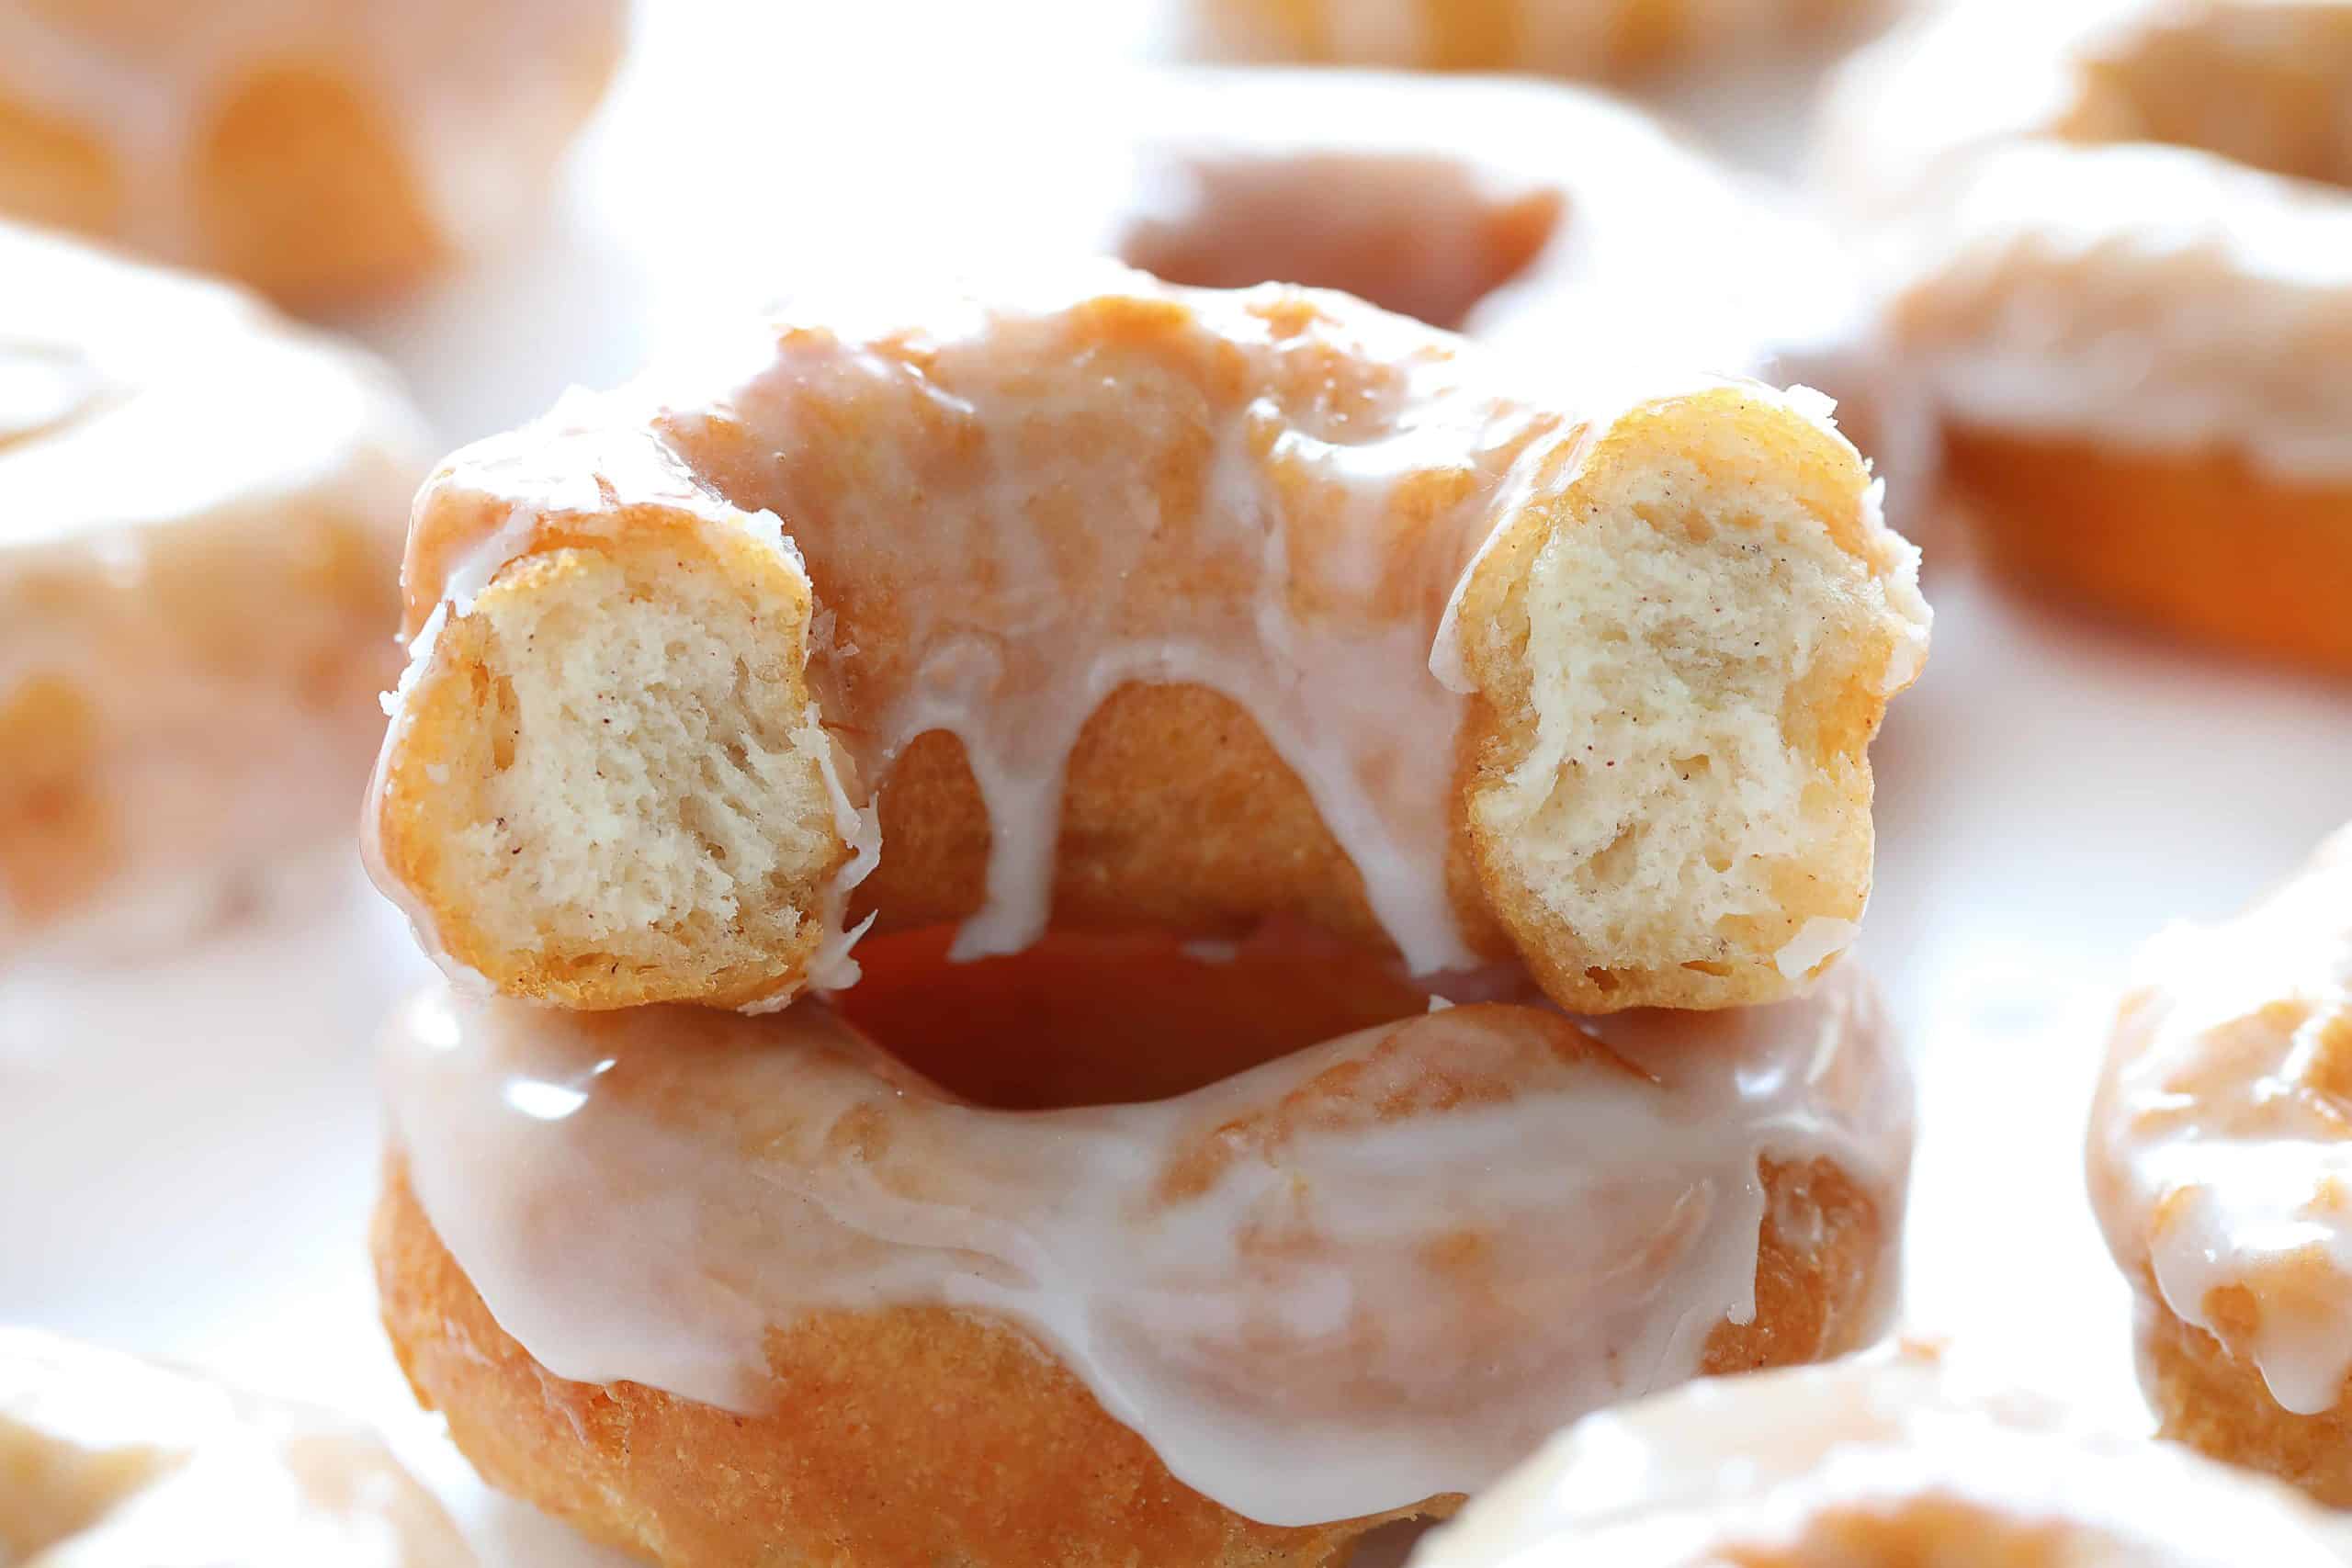 The Best Cake Donuts - showing the inside and glaze